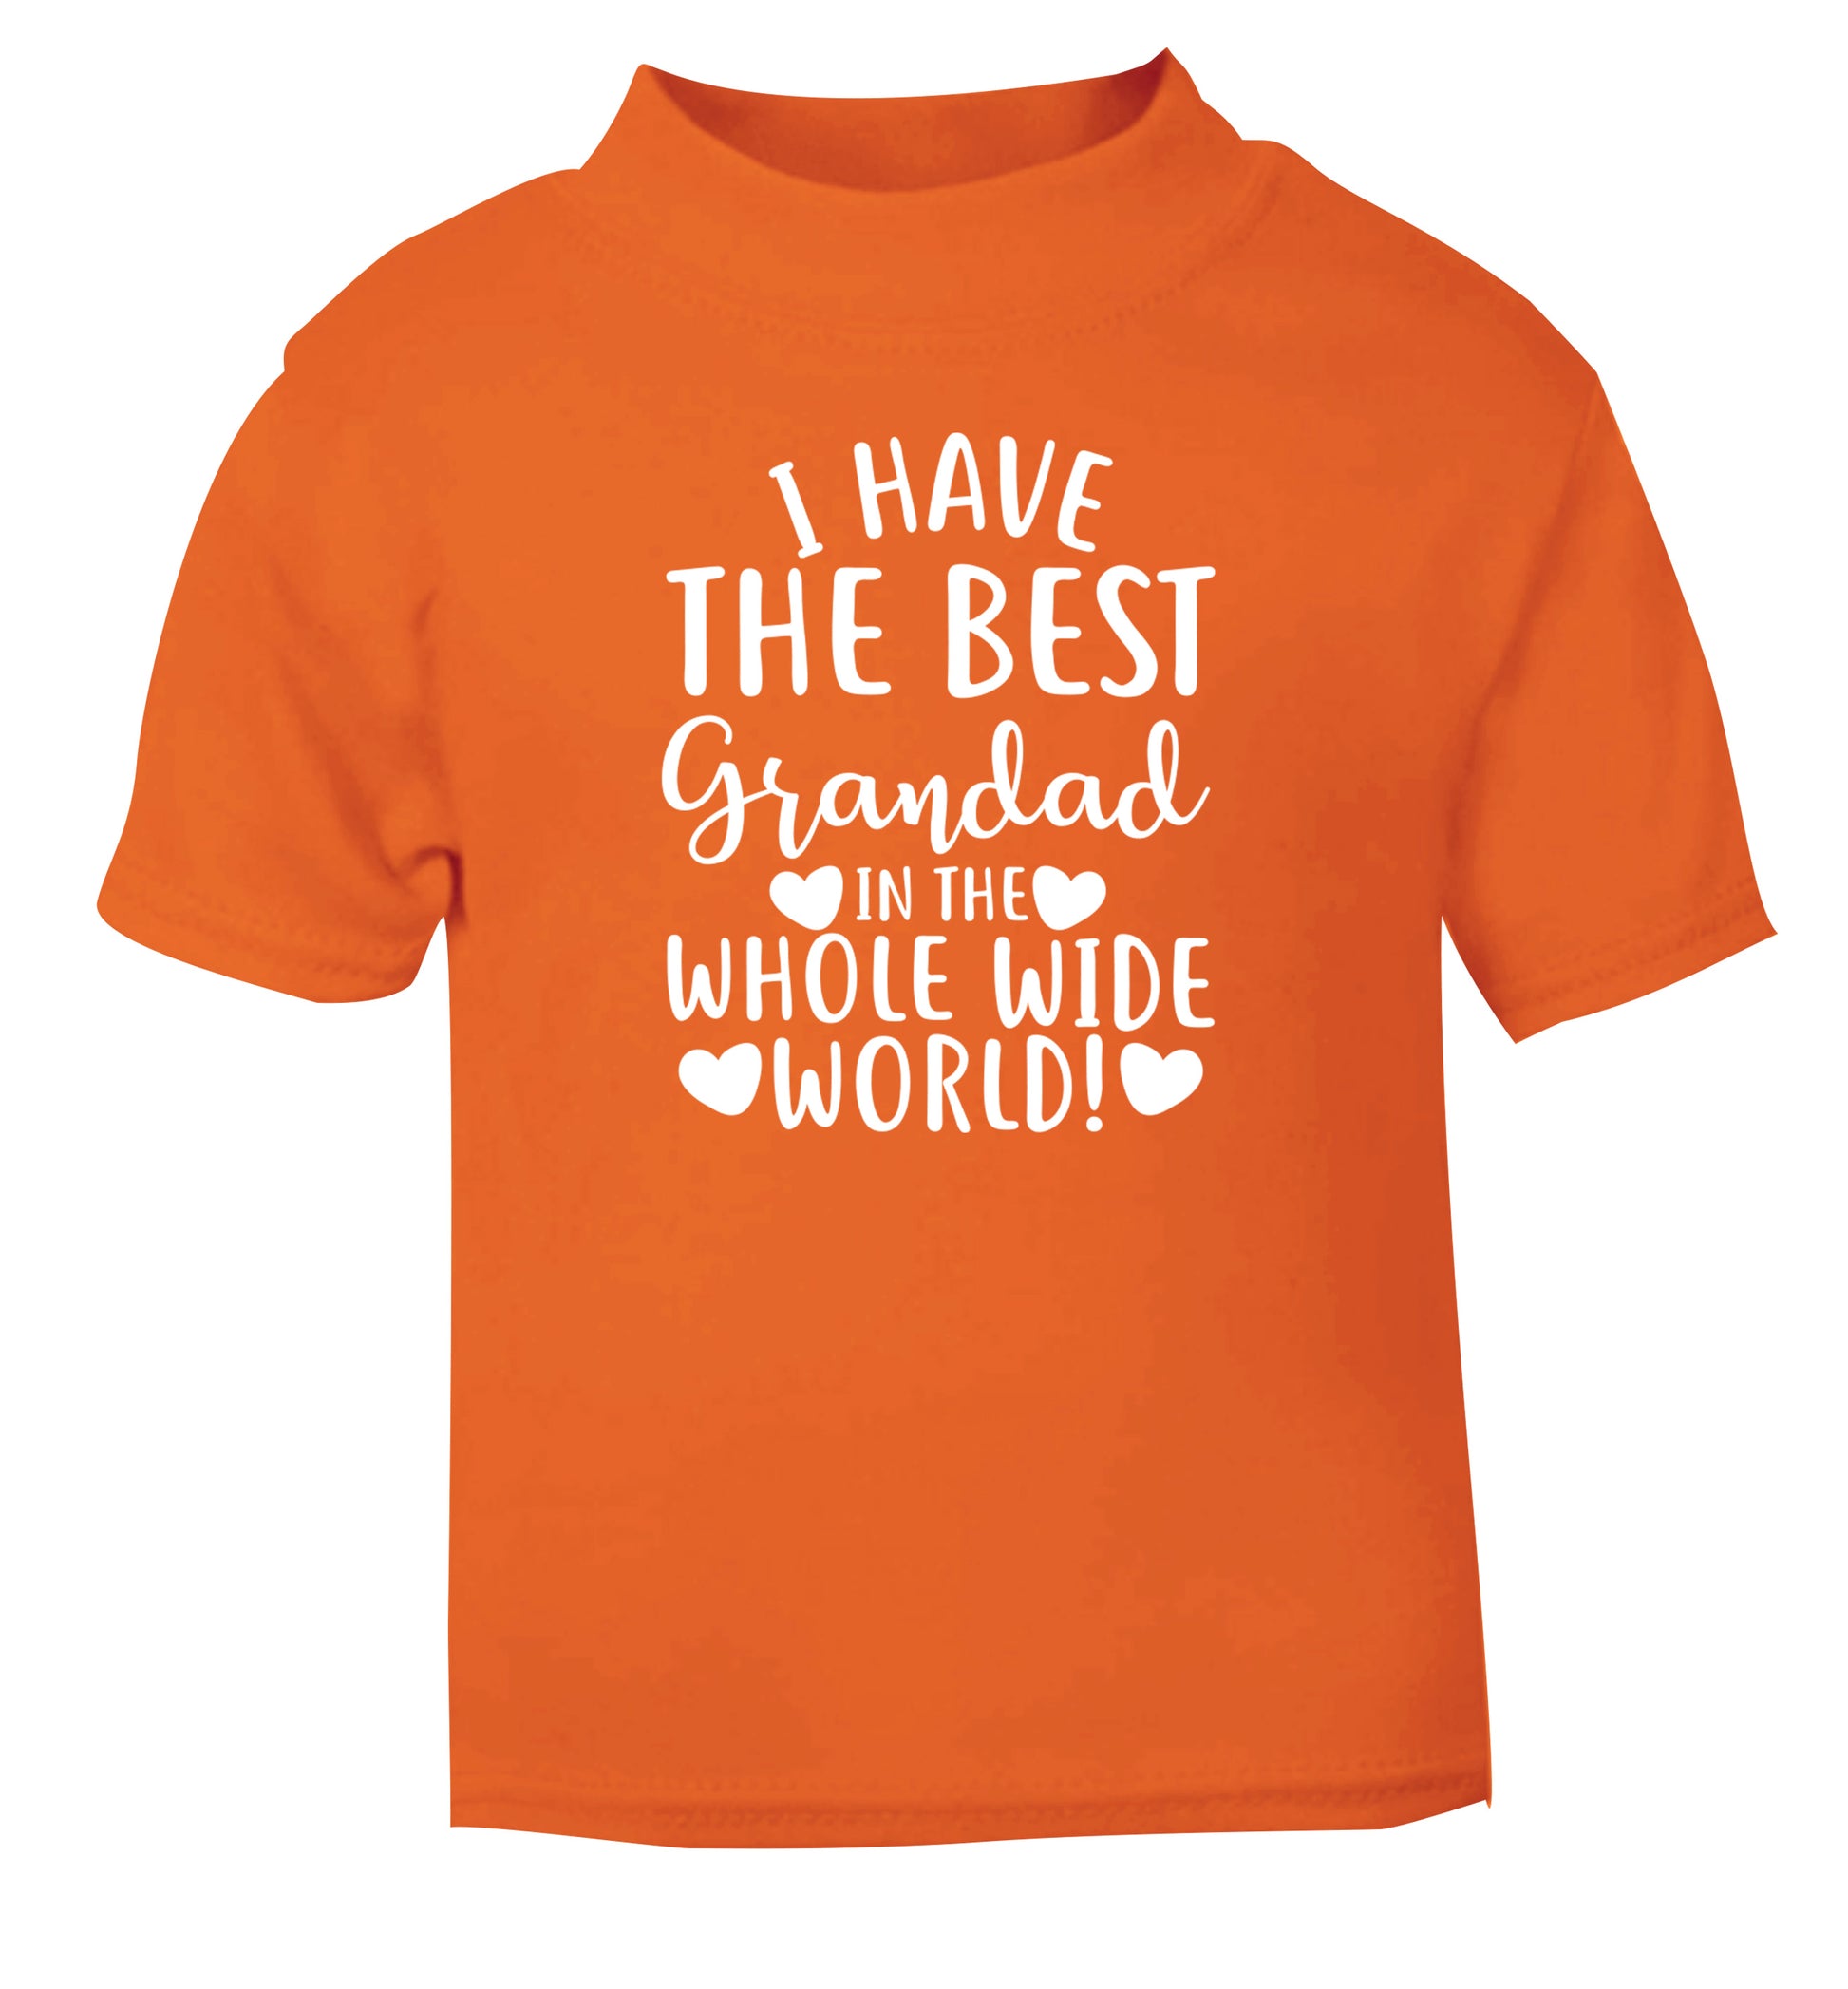 I have the best grandad in the whole wide world! orange Baby Toddler Tshirt 2 Years